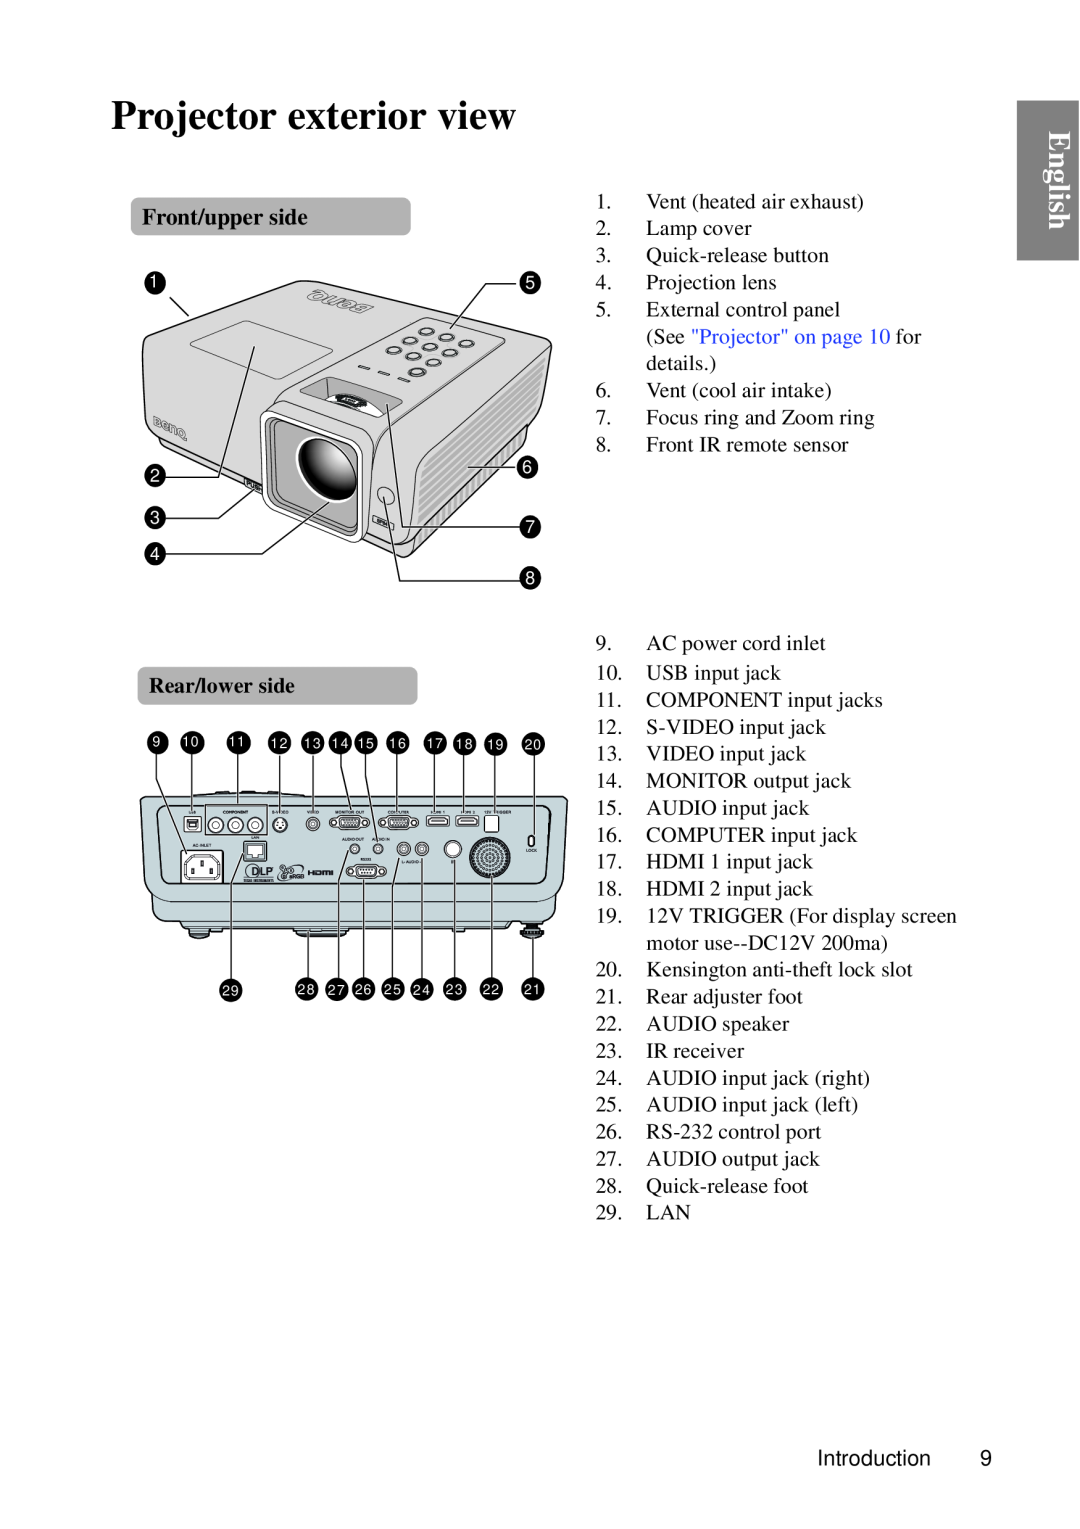 BenQ SP840 user manual Projector exterior view, English, Front/upper side 